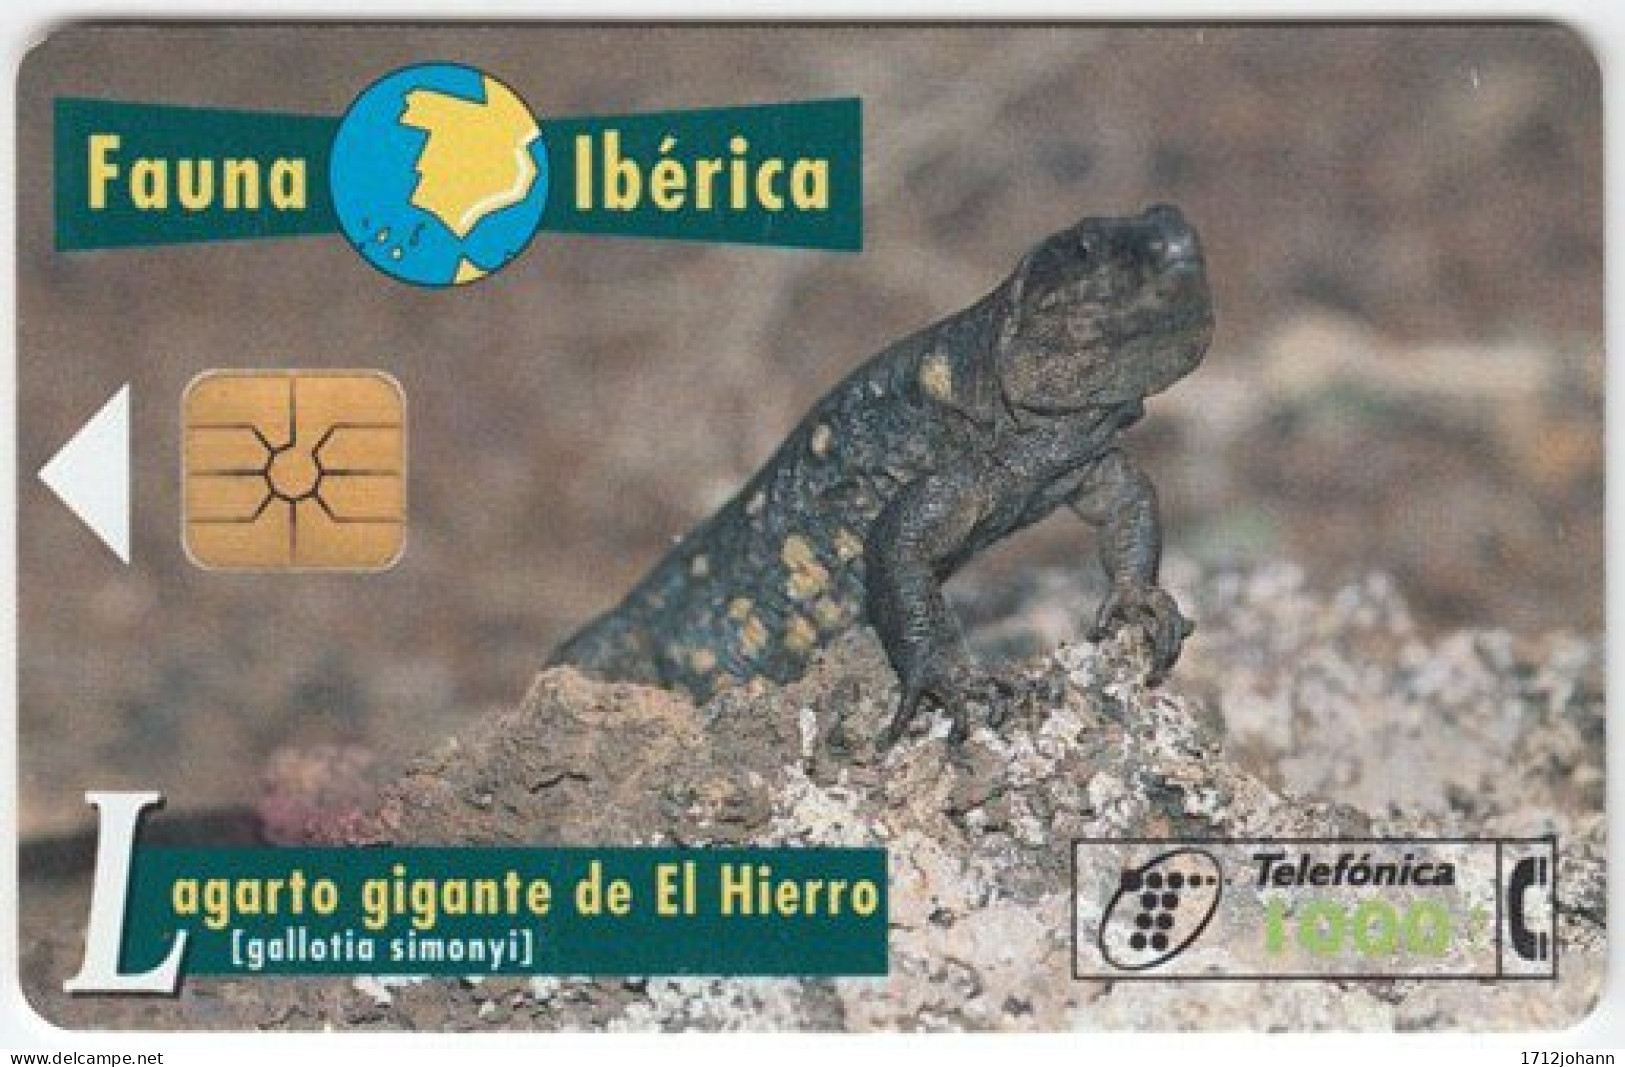 SPAIN A-527 Chip CabiTel - Animal, Lizard - Used - Basic Issues